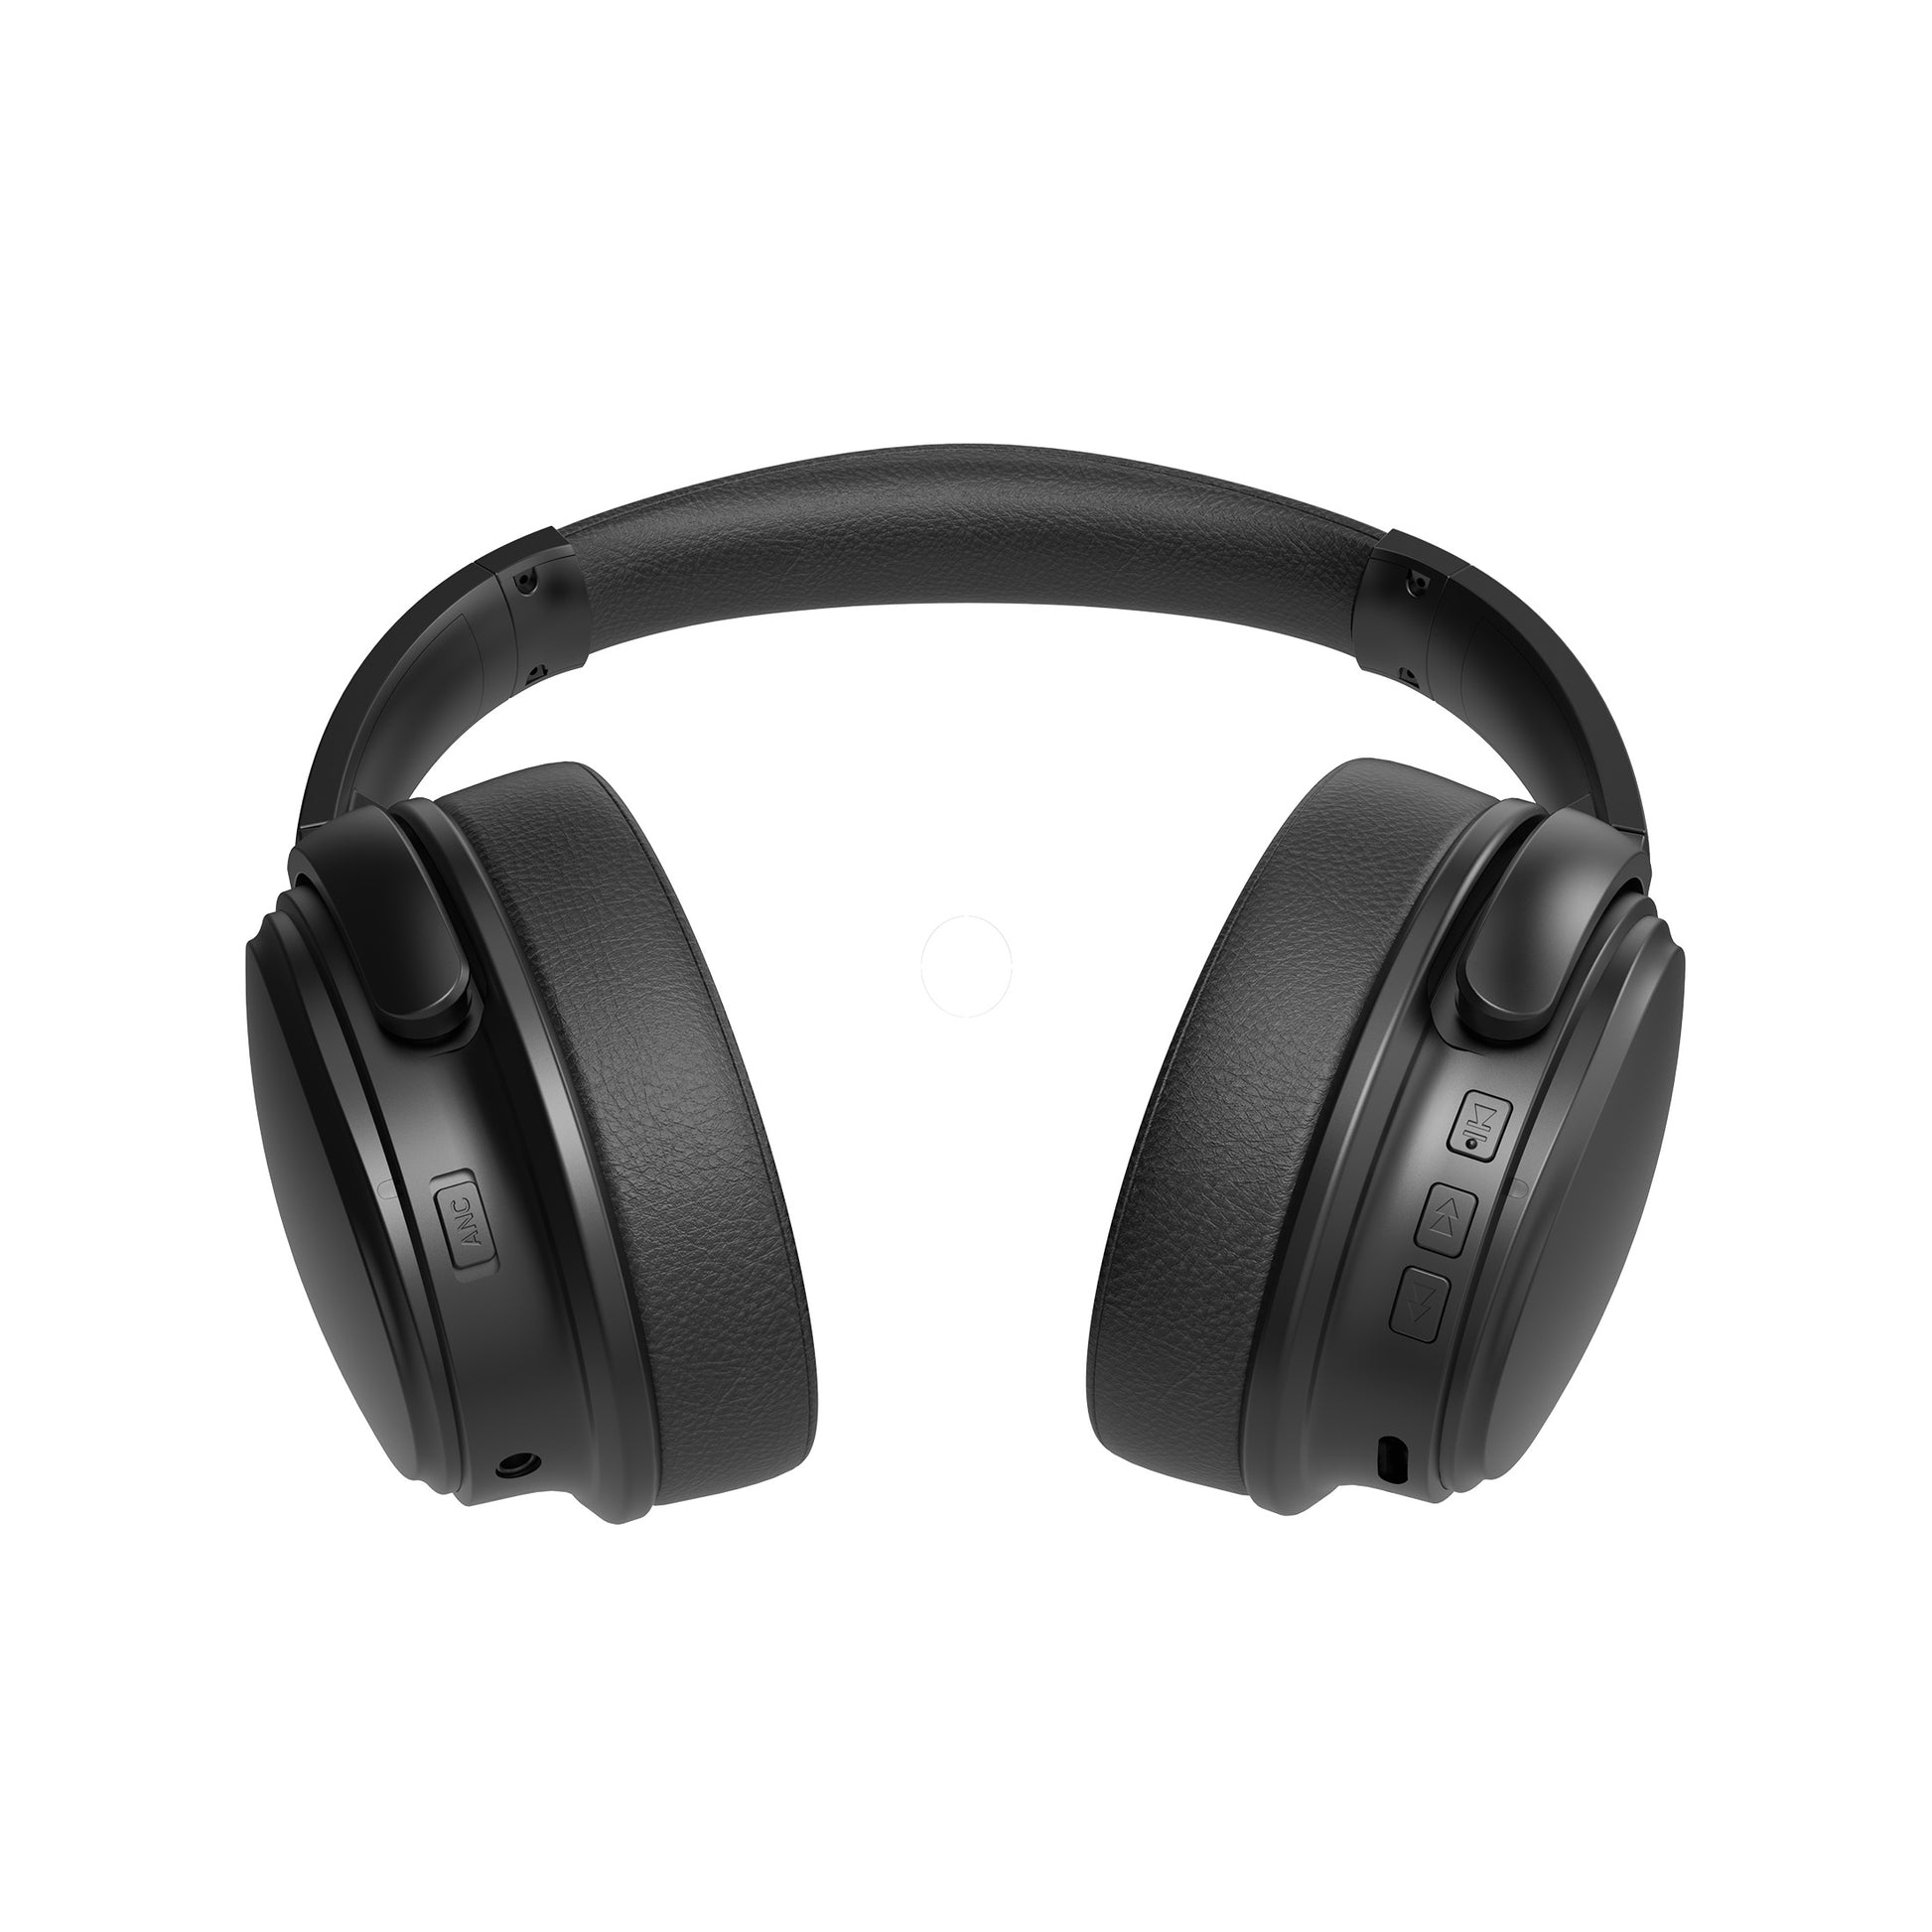 Photo of Morpheus 360 Krave ANC Wireless headphones with the Active Noise Cancelling button, 3.5mm AUX port, USB Type-C port, Play/Pause button, and Track Forward/Back button.